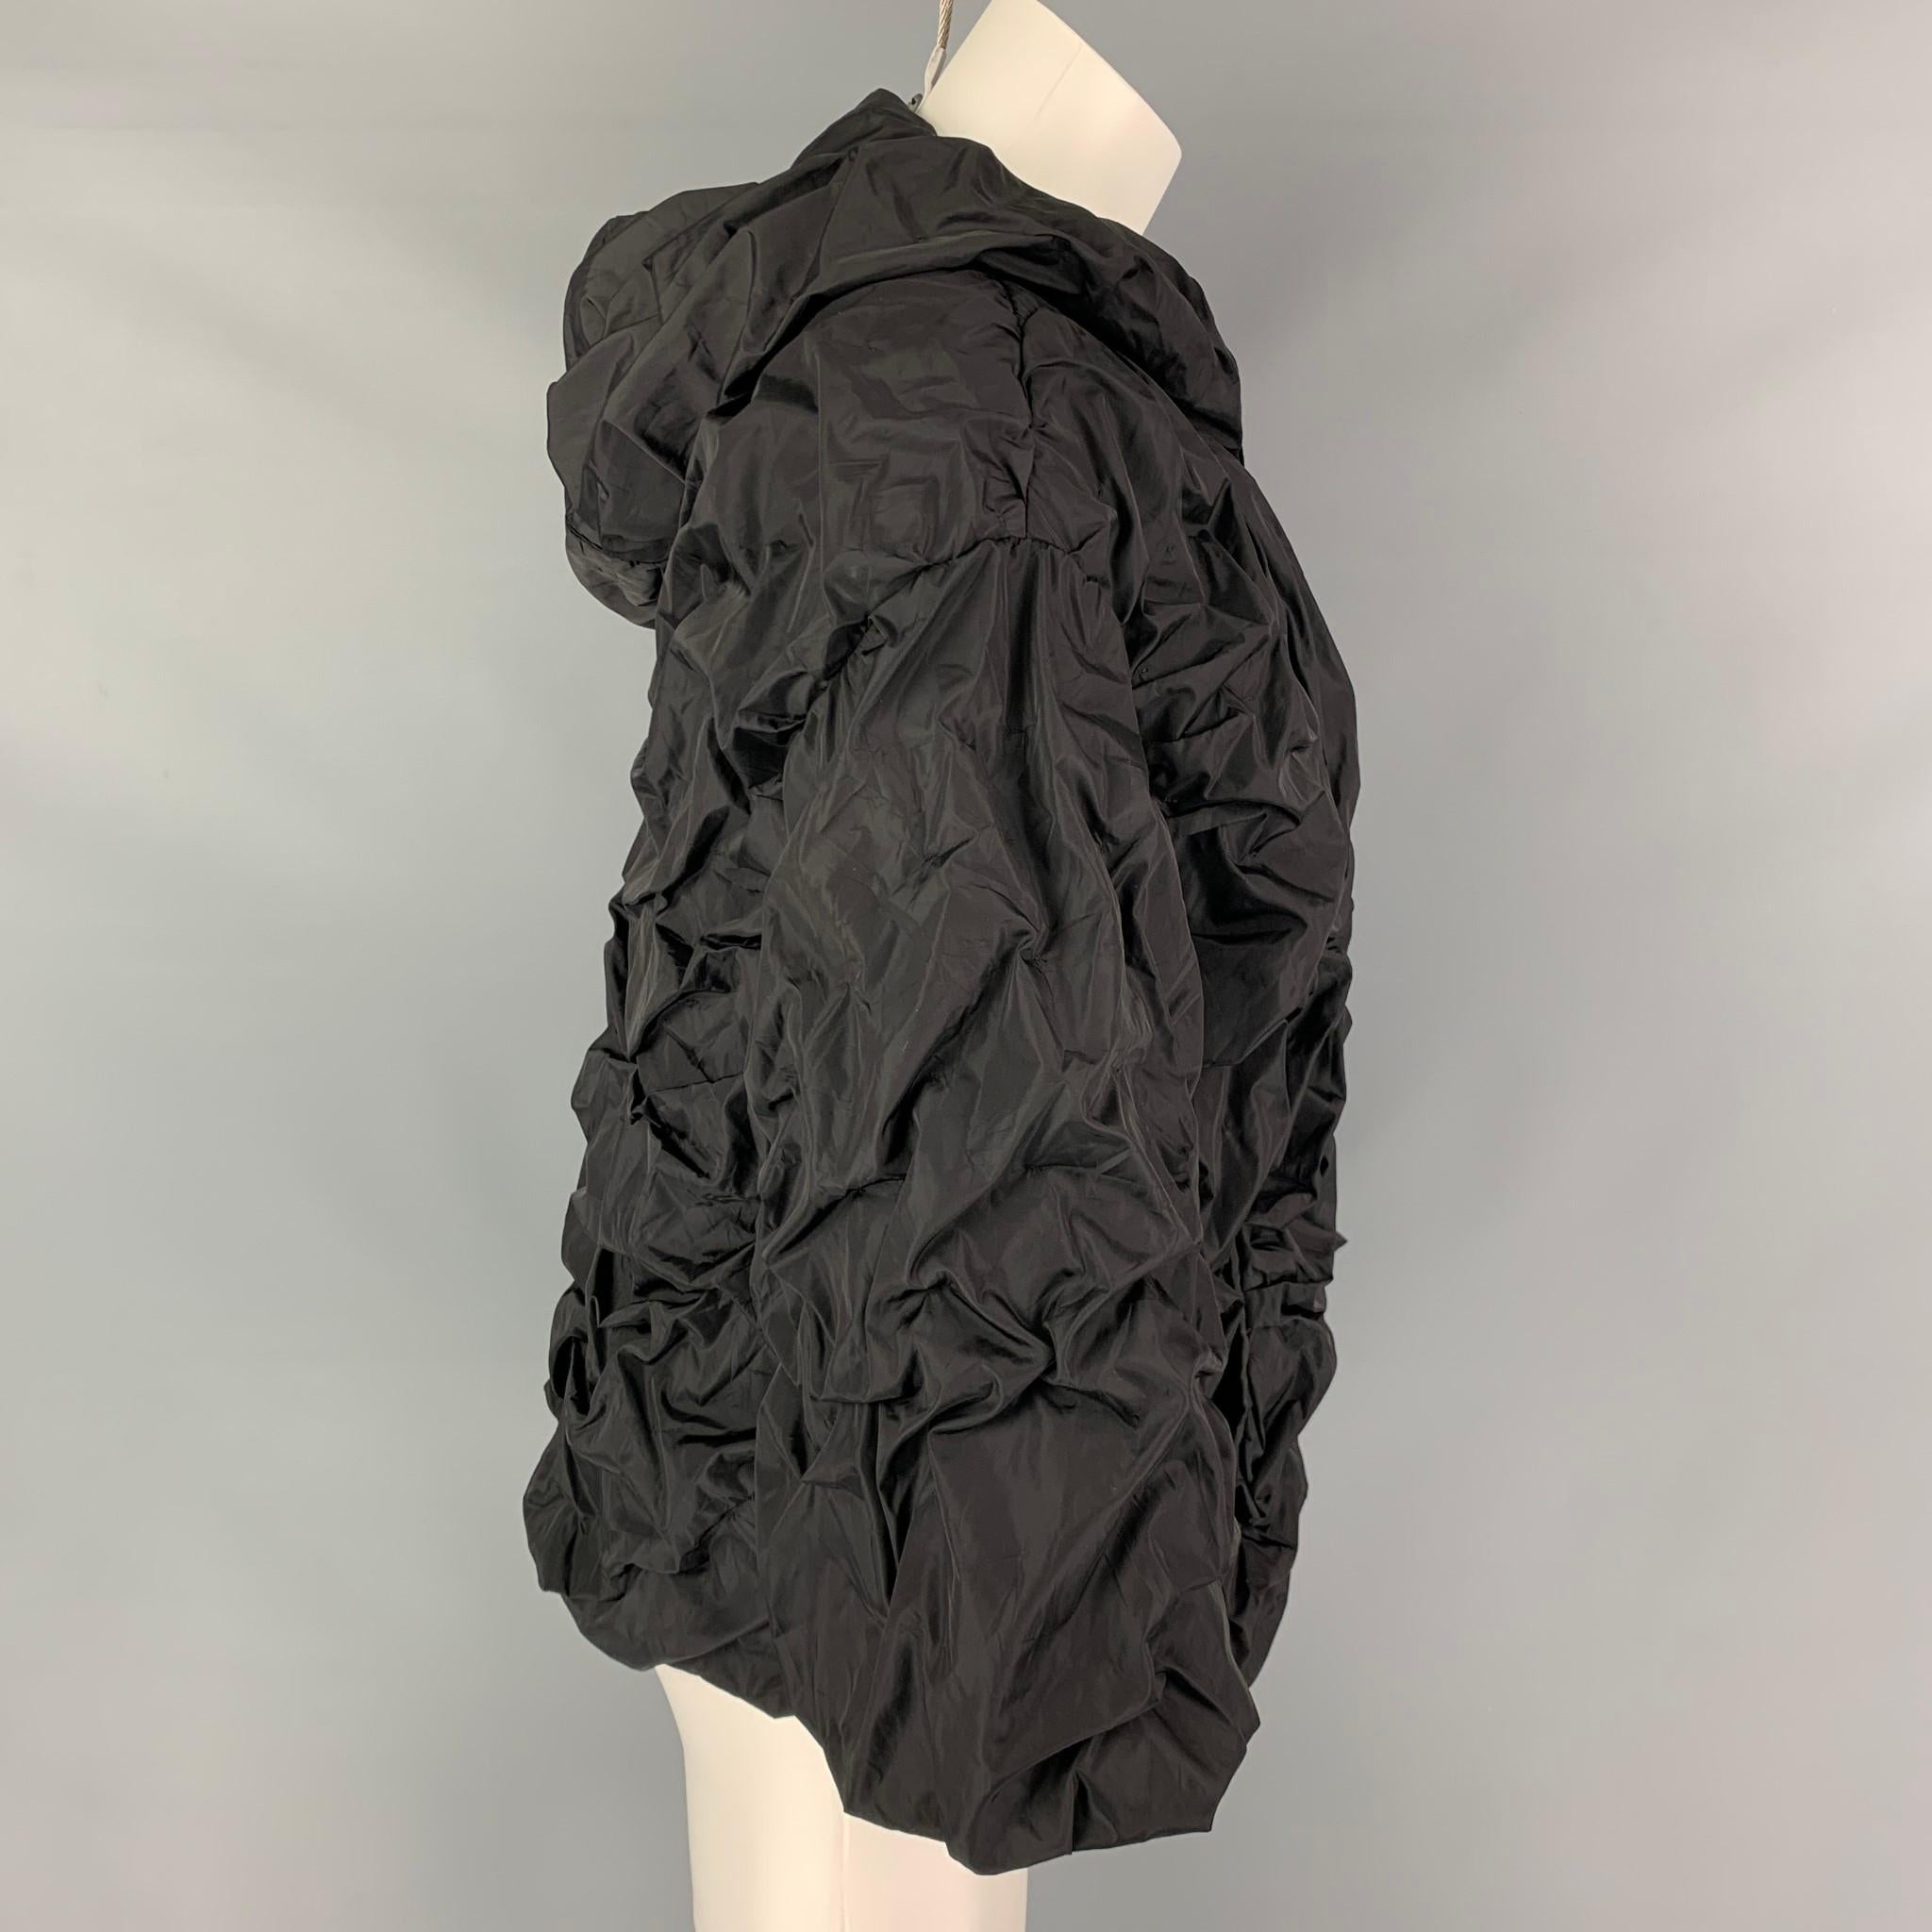 PRADA jacket comes in a black nylon featuring a ruched design, oversized fit, hooded, slit pockets, and a full zipper closure. Made in Italy. 

Very Good Pre-Owned Condition.
Marked: 36

Measurements:

Shoulder: 21 in.
Bust: 42 in.
Sleeve: 16.5